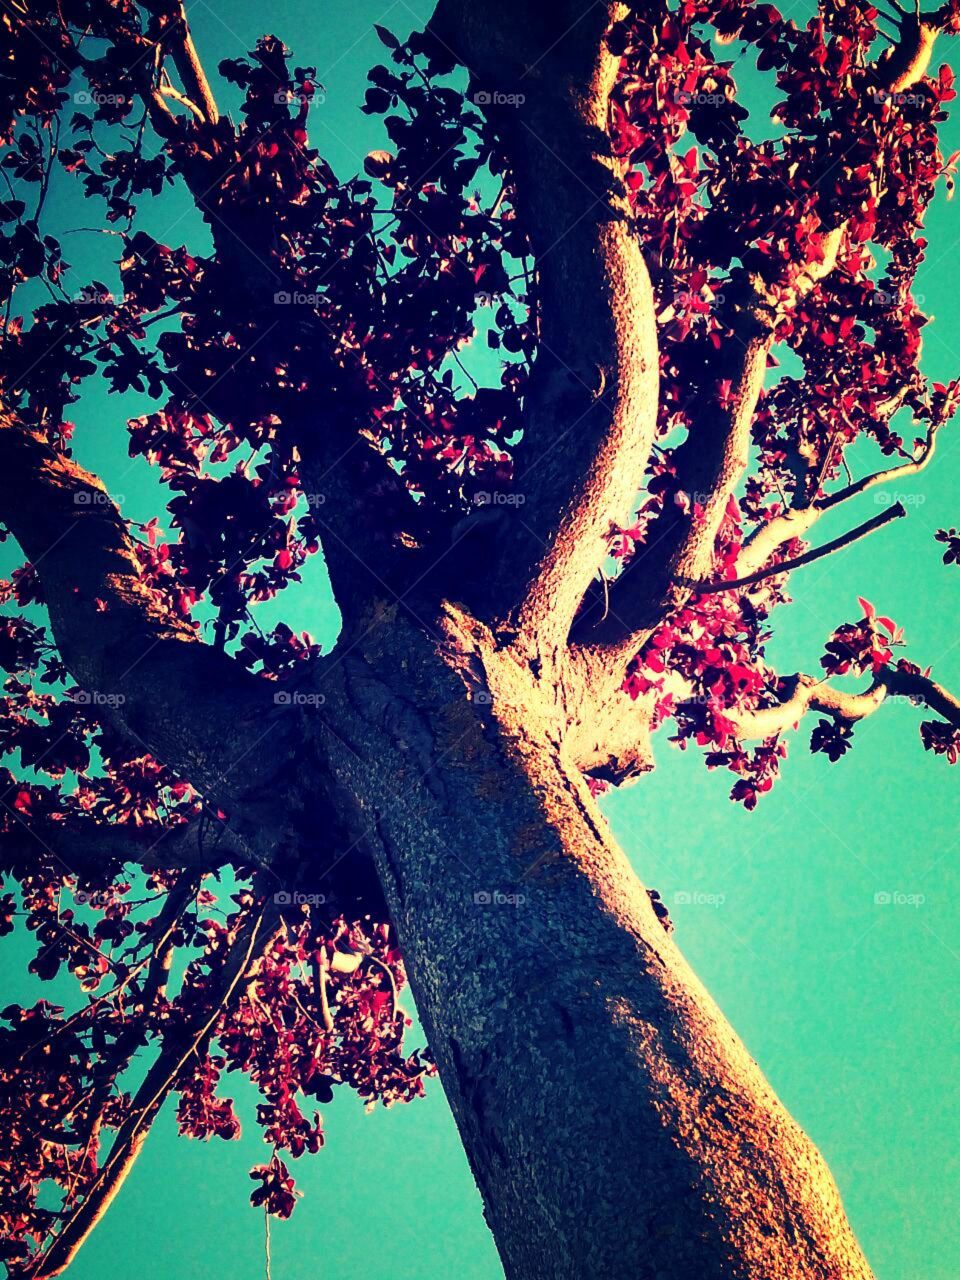 The beauty of a tree